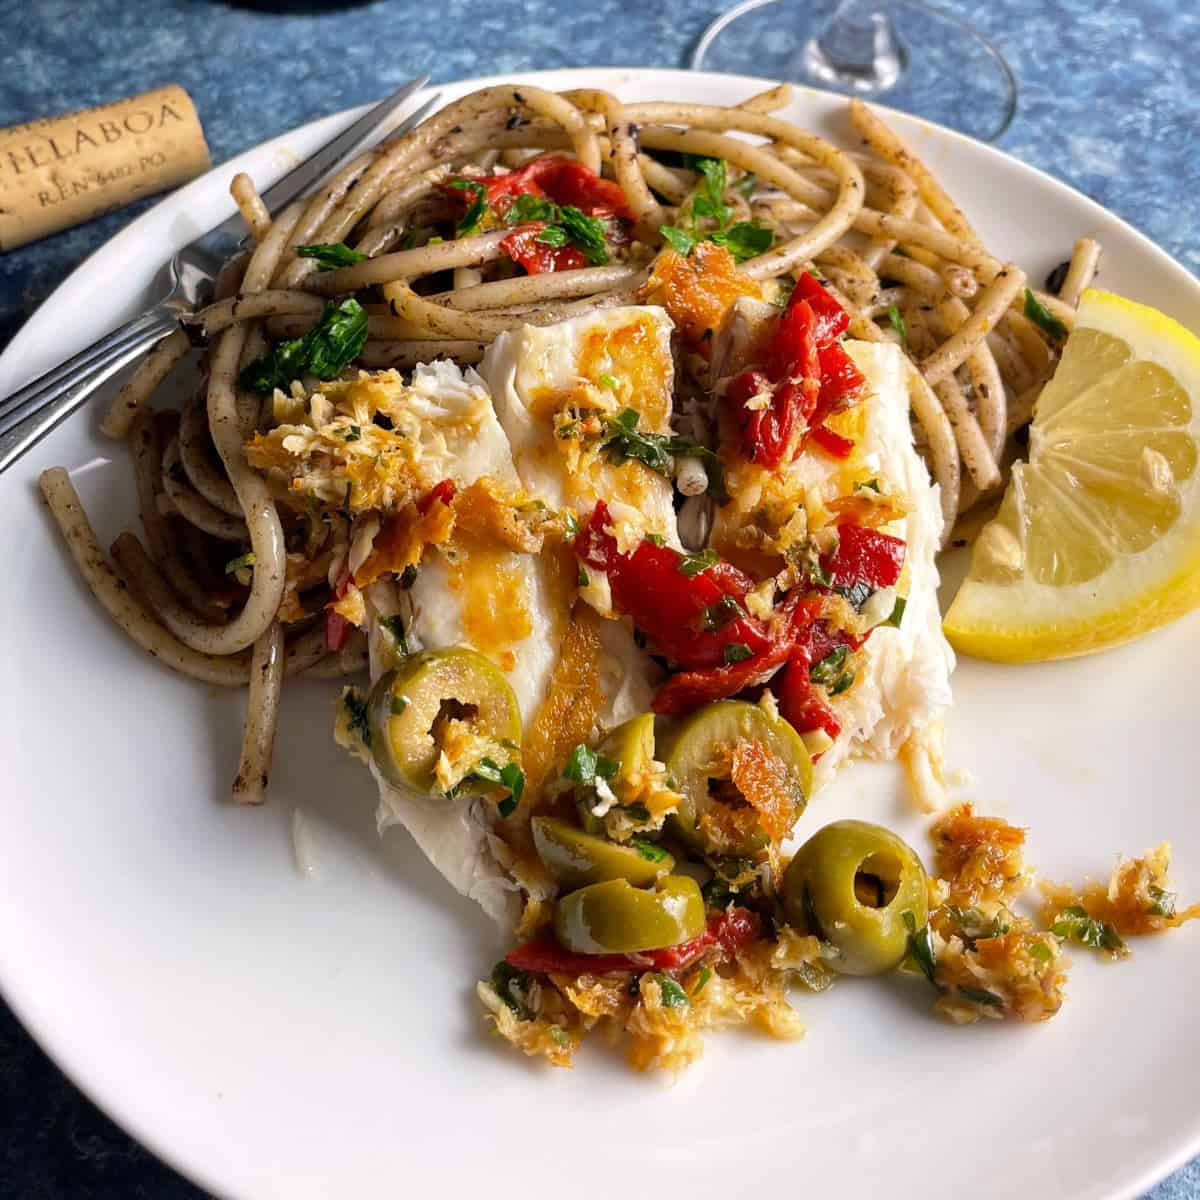 pan seared sea bass topped with a sauce including olives, red peppers and parsley. Served with pasta and a slice of lemon.